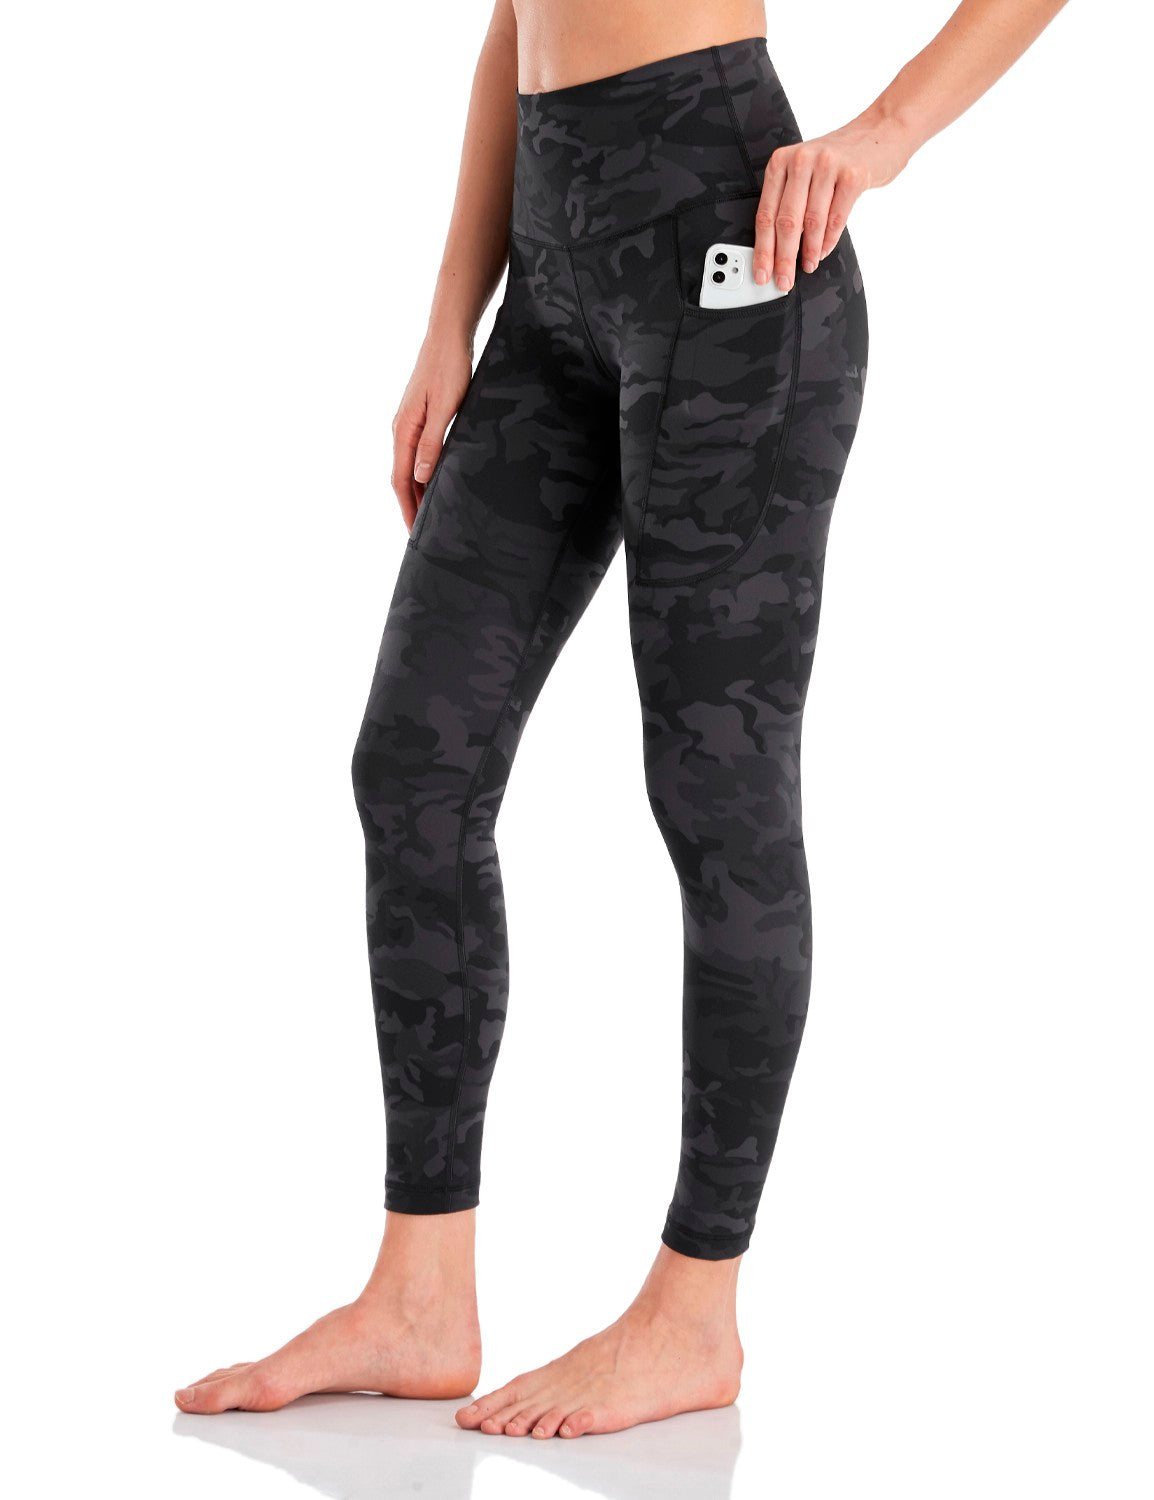 HeyNuts Essential 7/8 Leggings, Buttery Soft Yoga Pants Tummy Control  Workout Pants 25'', Black, S : Buy Online at Best Price in KSA - Souq is  now : Fashion